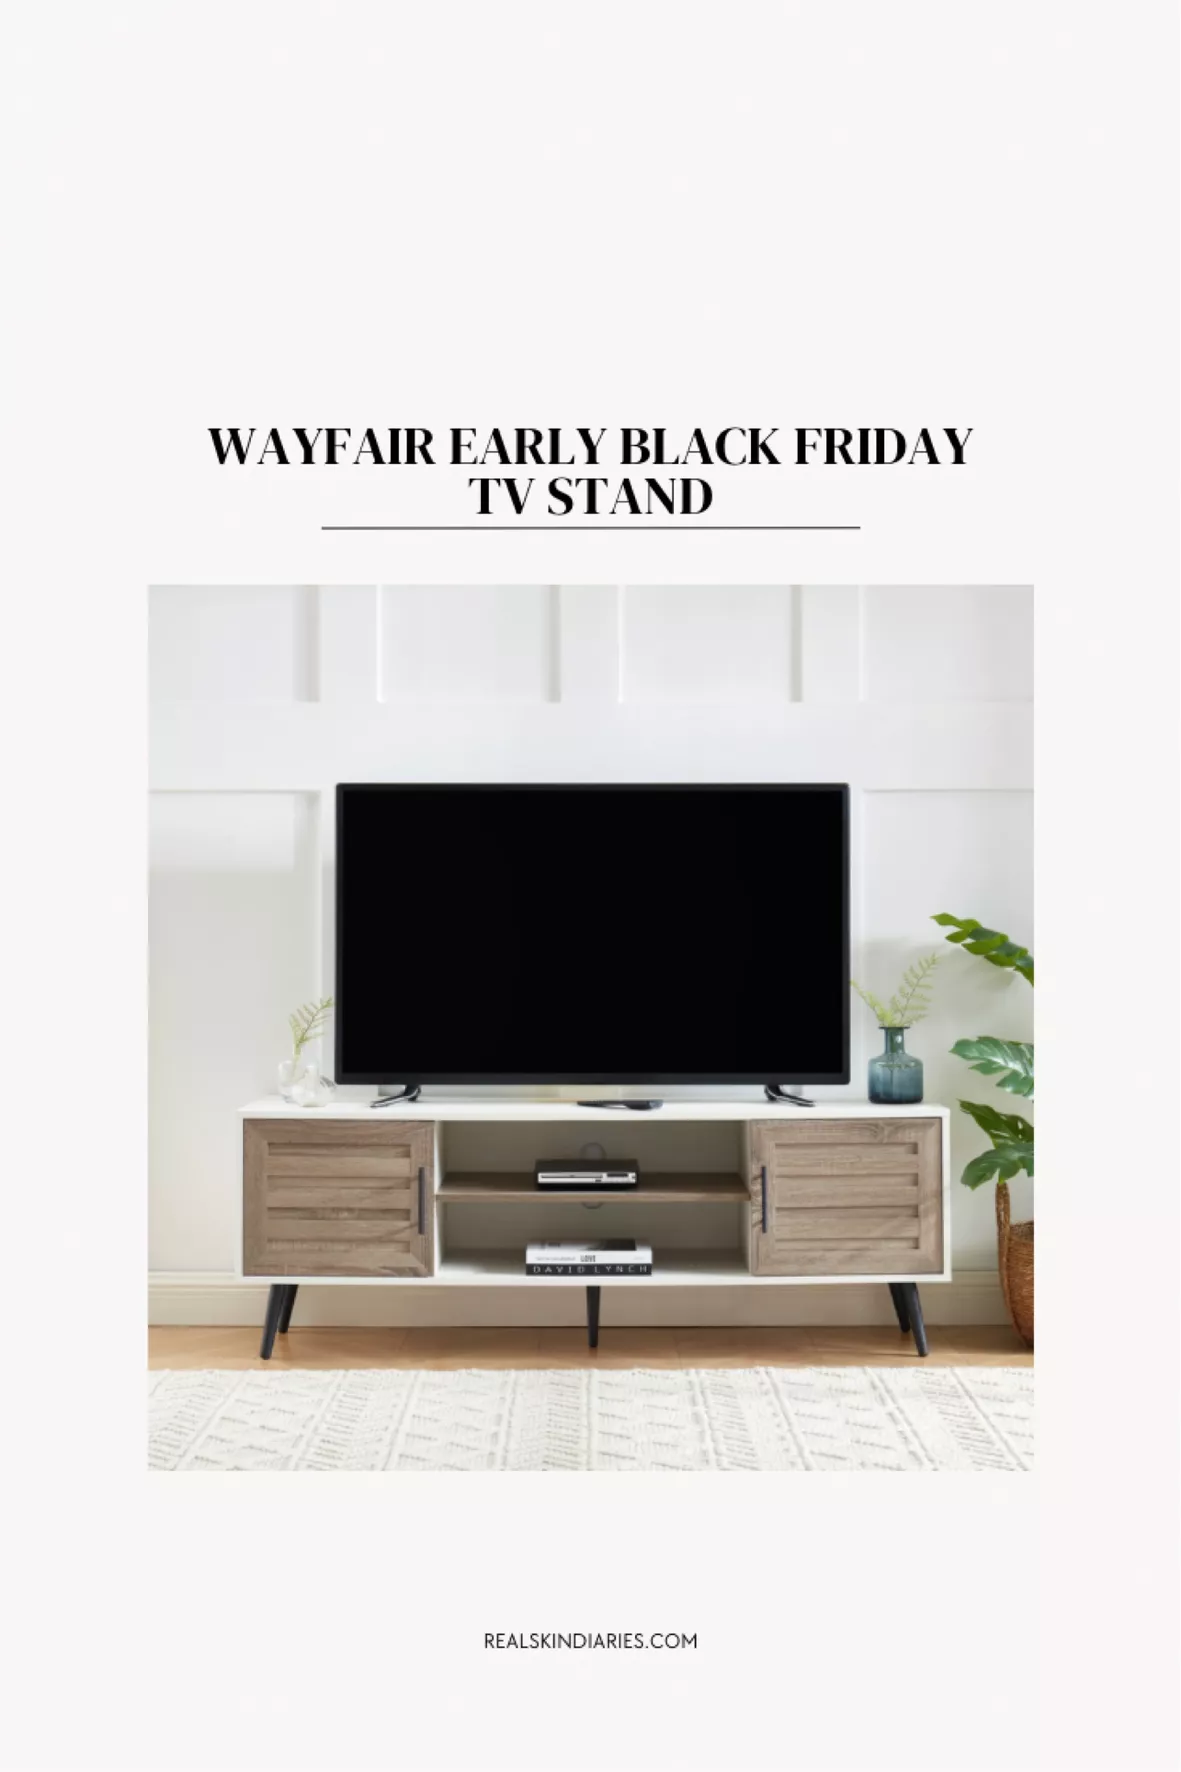 Bryner TV Stand For TVs Up To 70